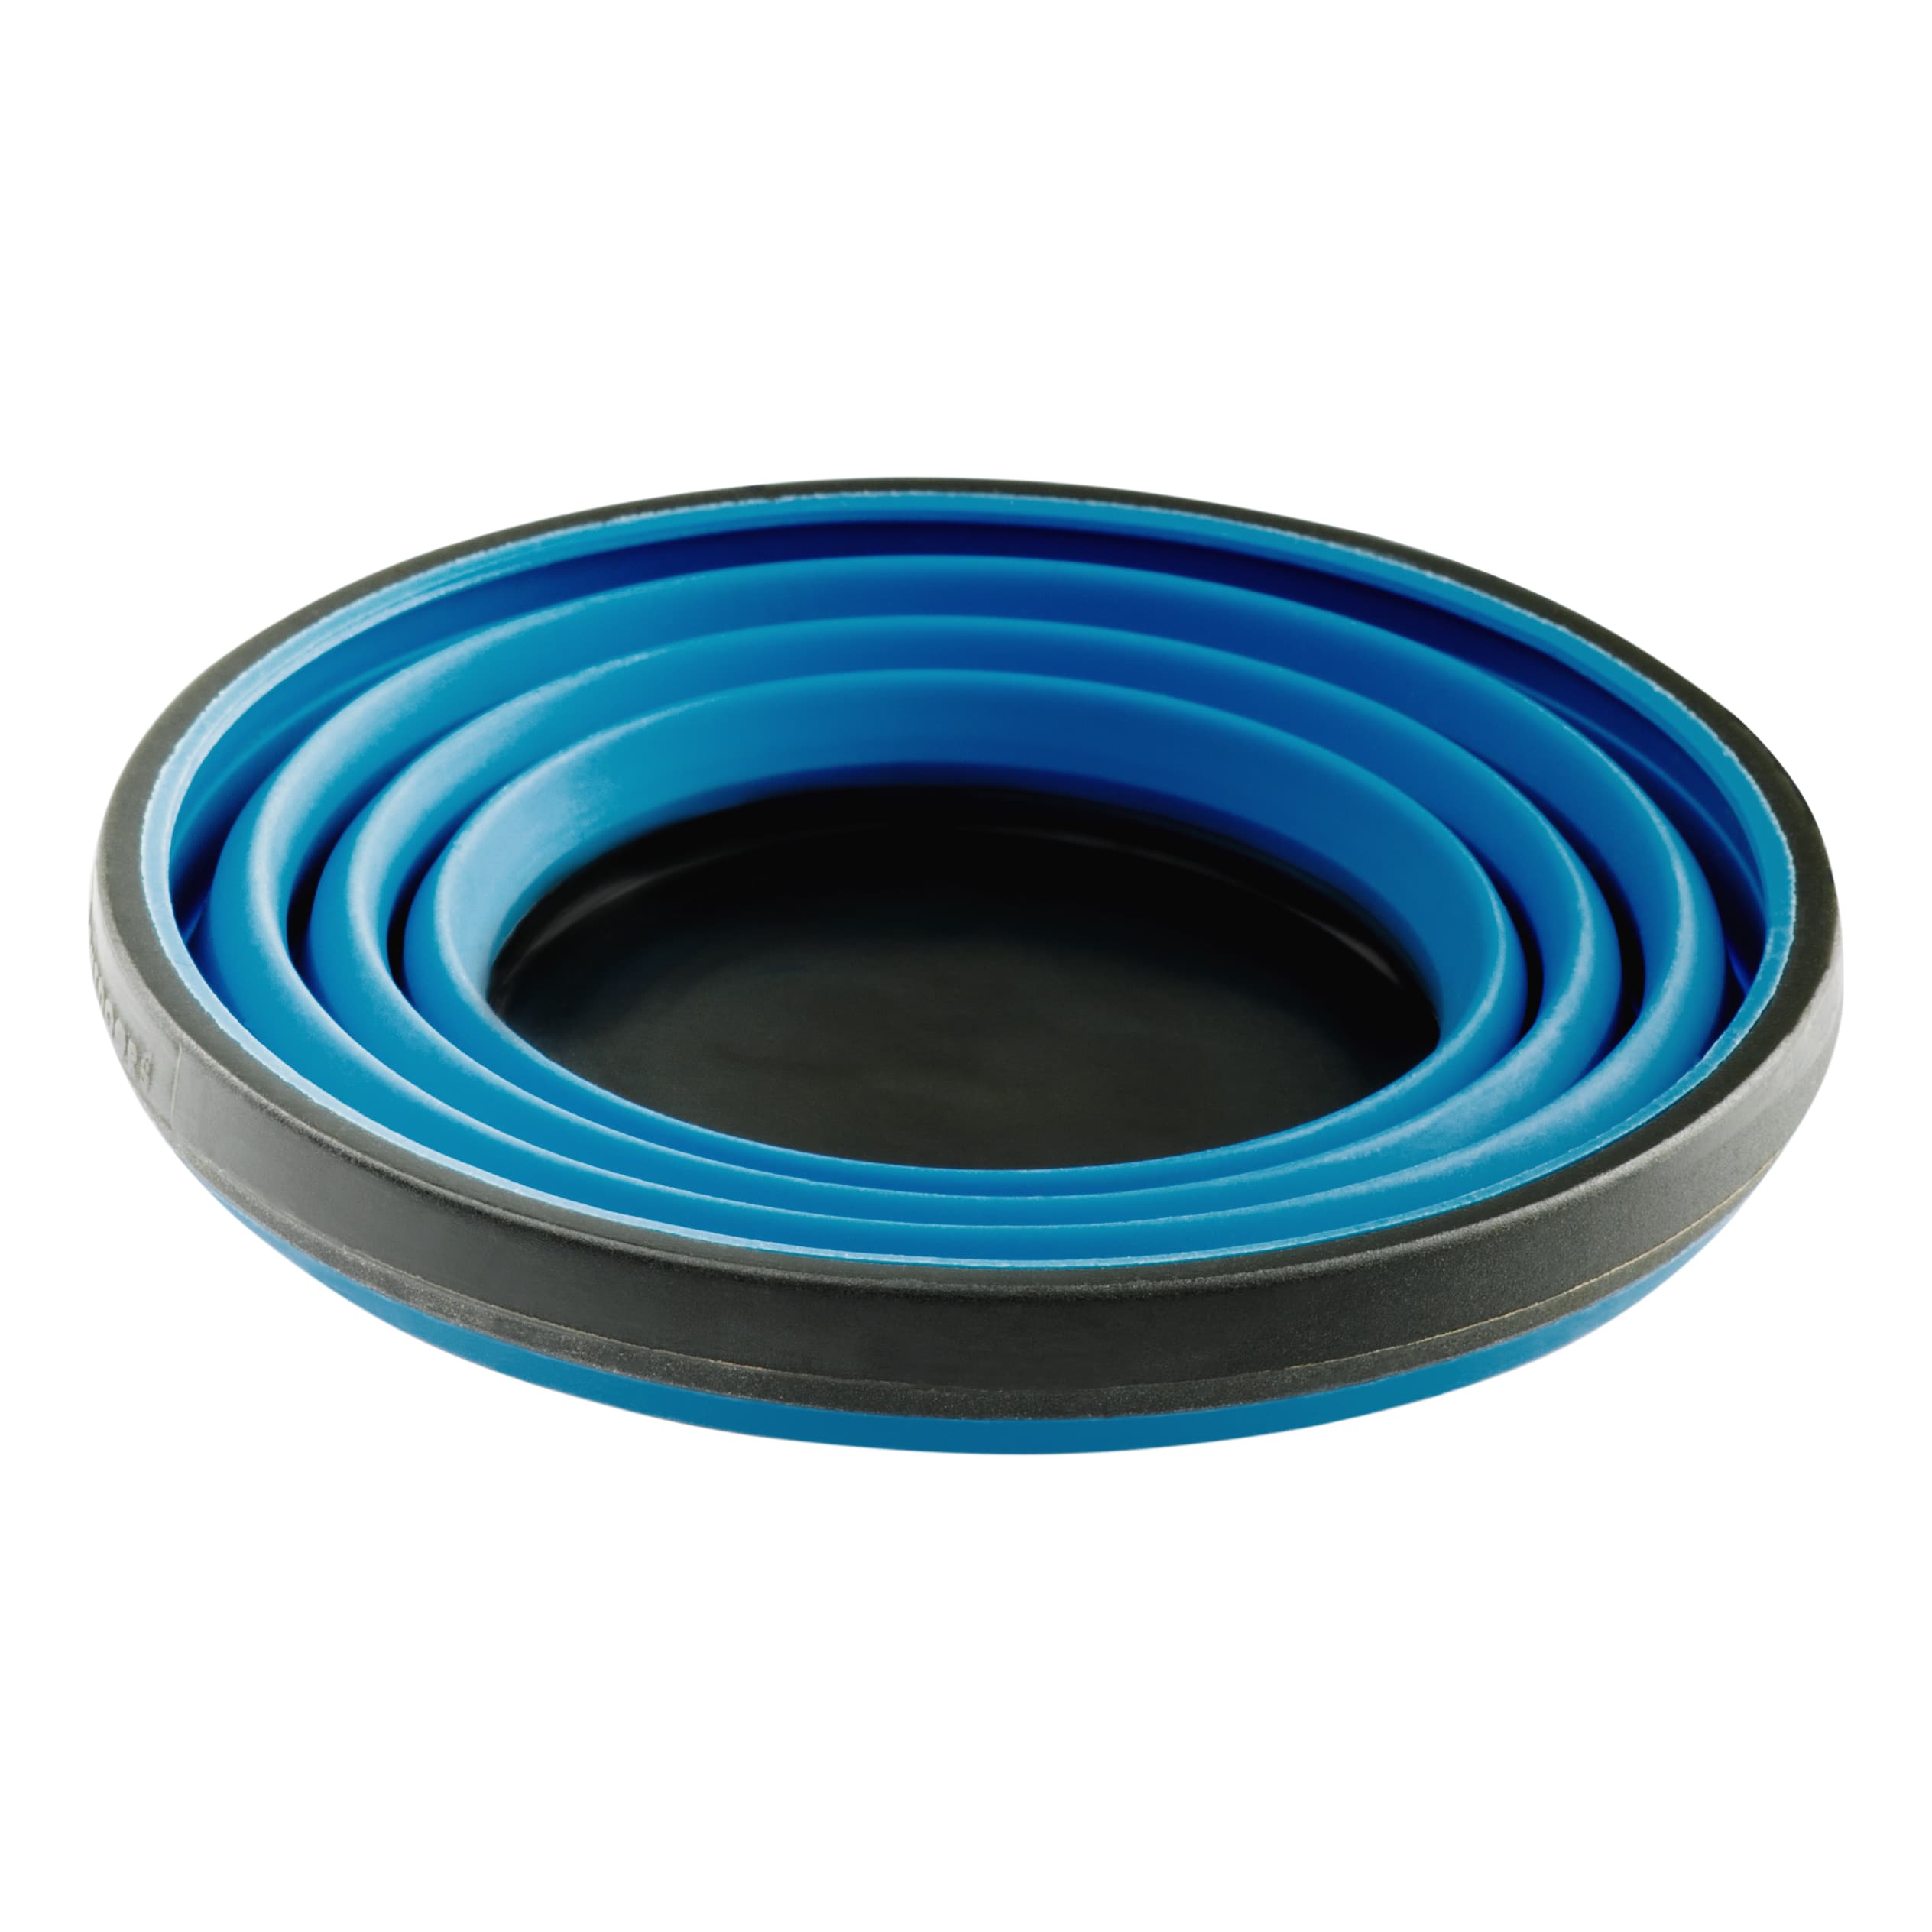 GSI Outdoors Escape Collapsible Cup - Blue - Collapsed View